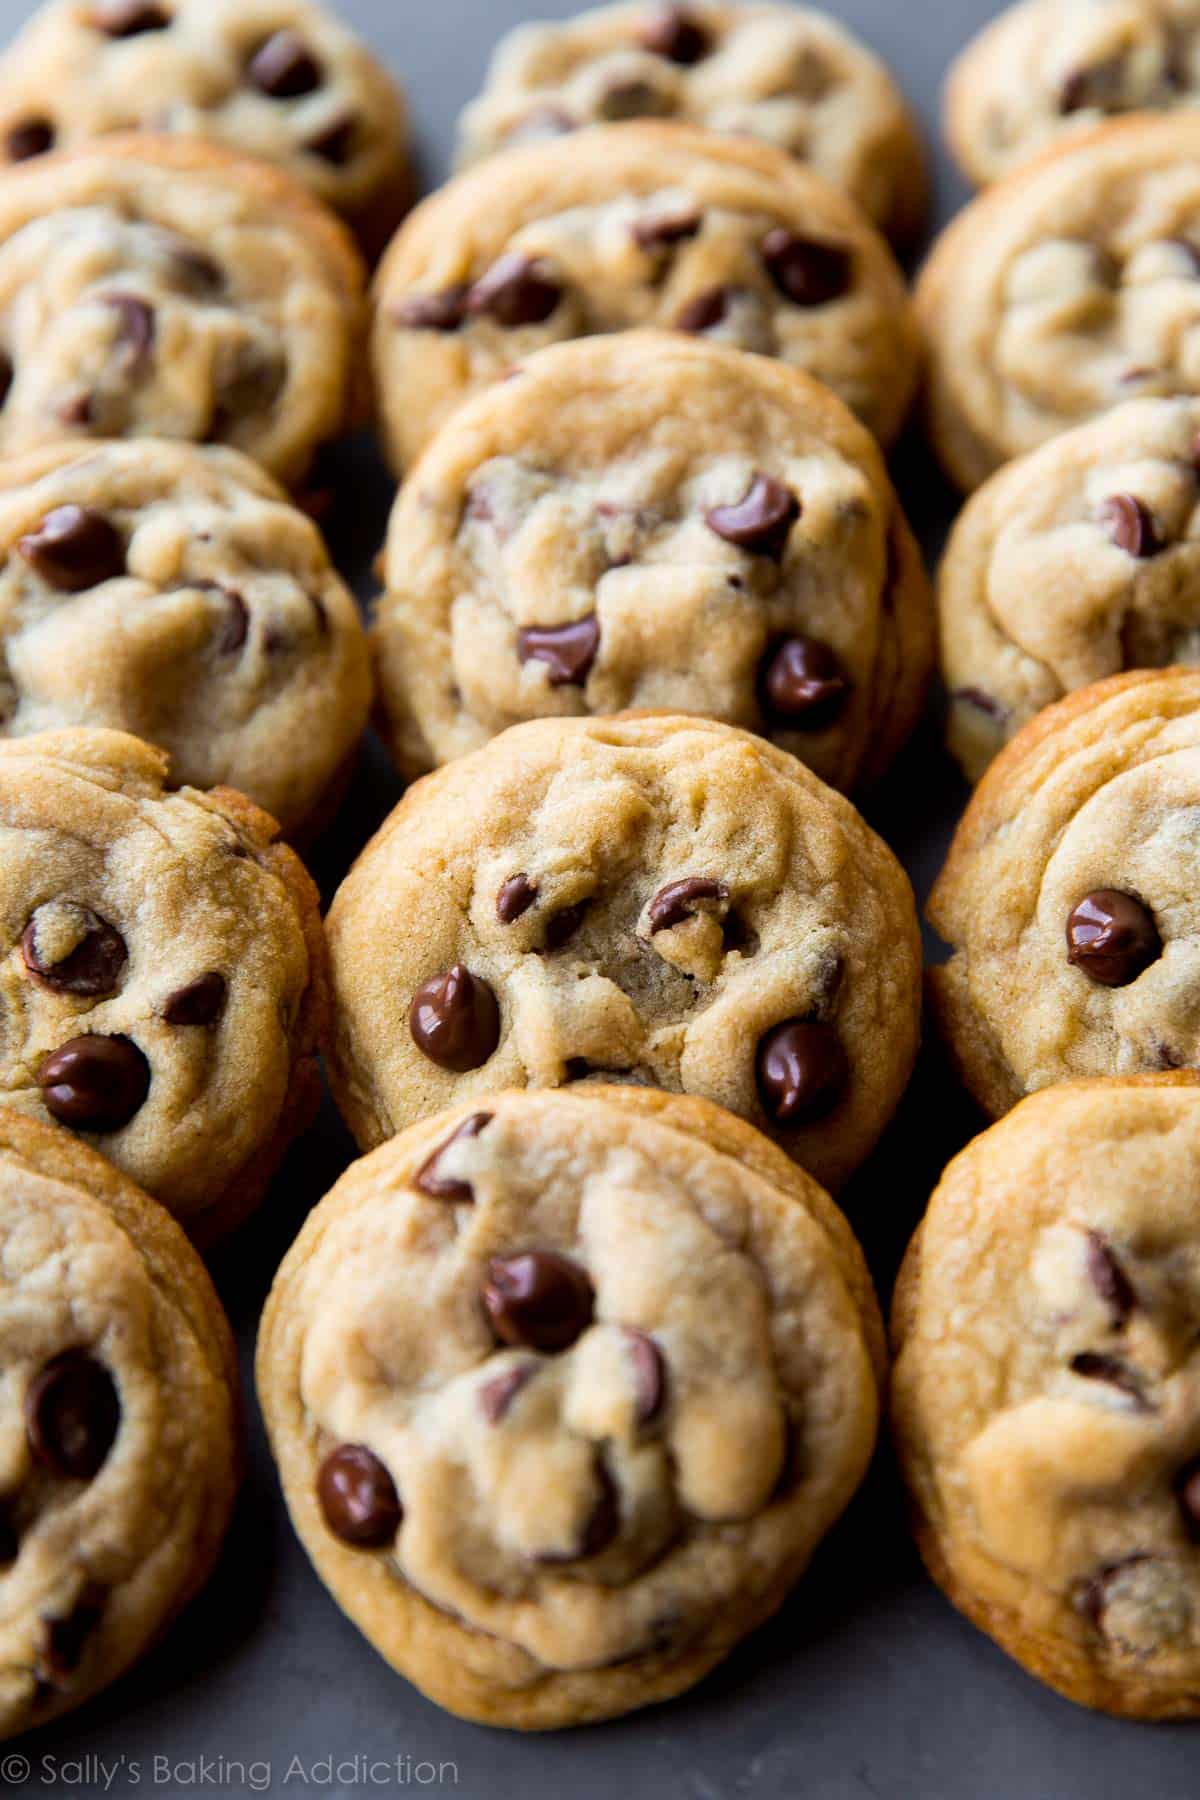 Soft baked chocolate chip cookies